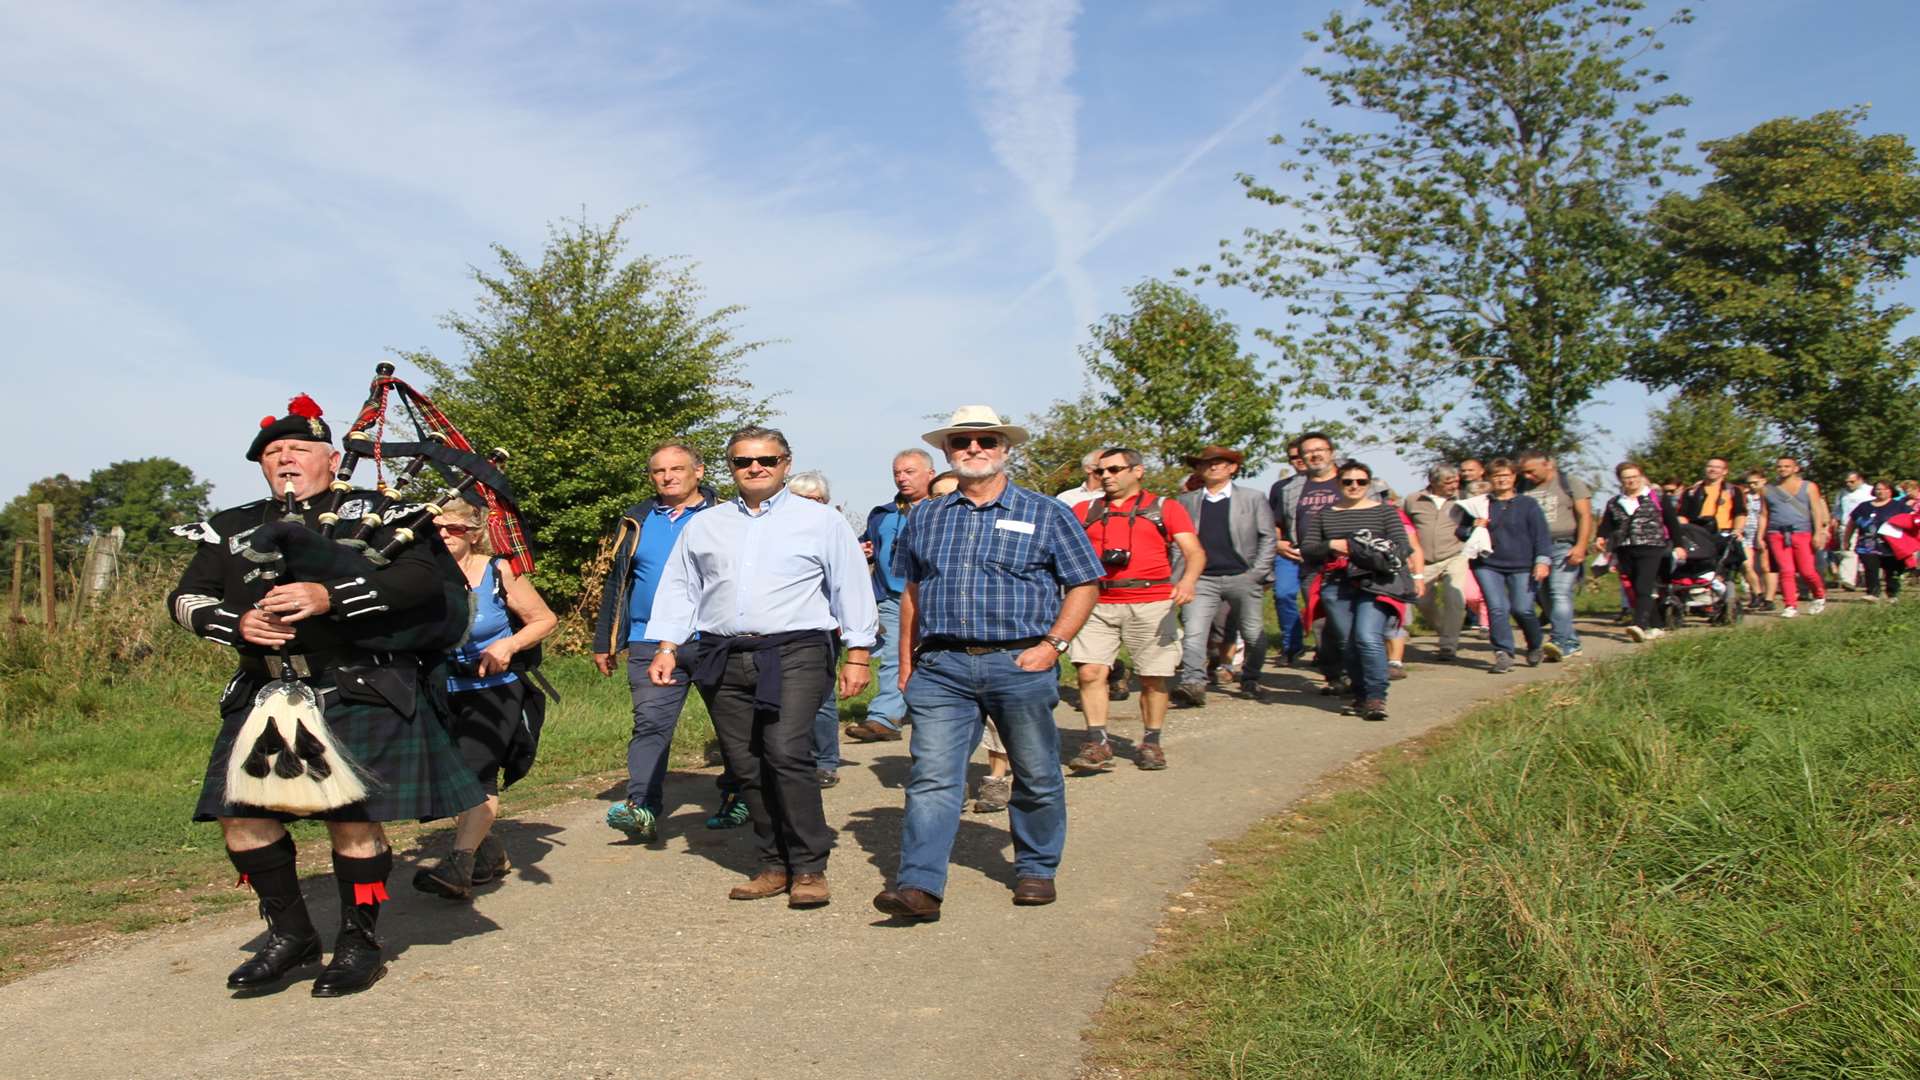 A lone Scots piper leads a group of French and English paying tribute to Sheppey First World War flying ace Major James McCudden, led by his great nephew Richard Benns (with hat) next to Keith Dobson (in light blue shirt and black trousers). Picture: Grace Dobson.